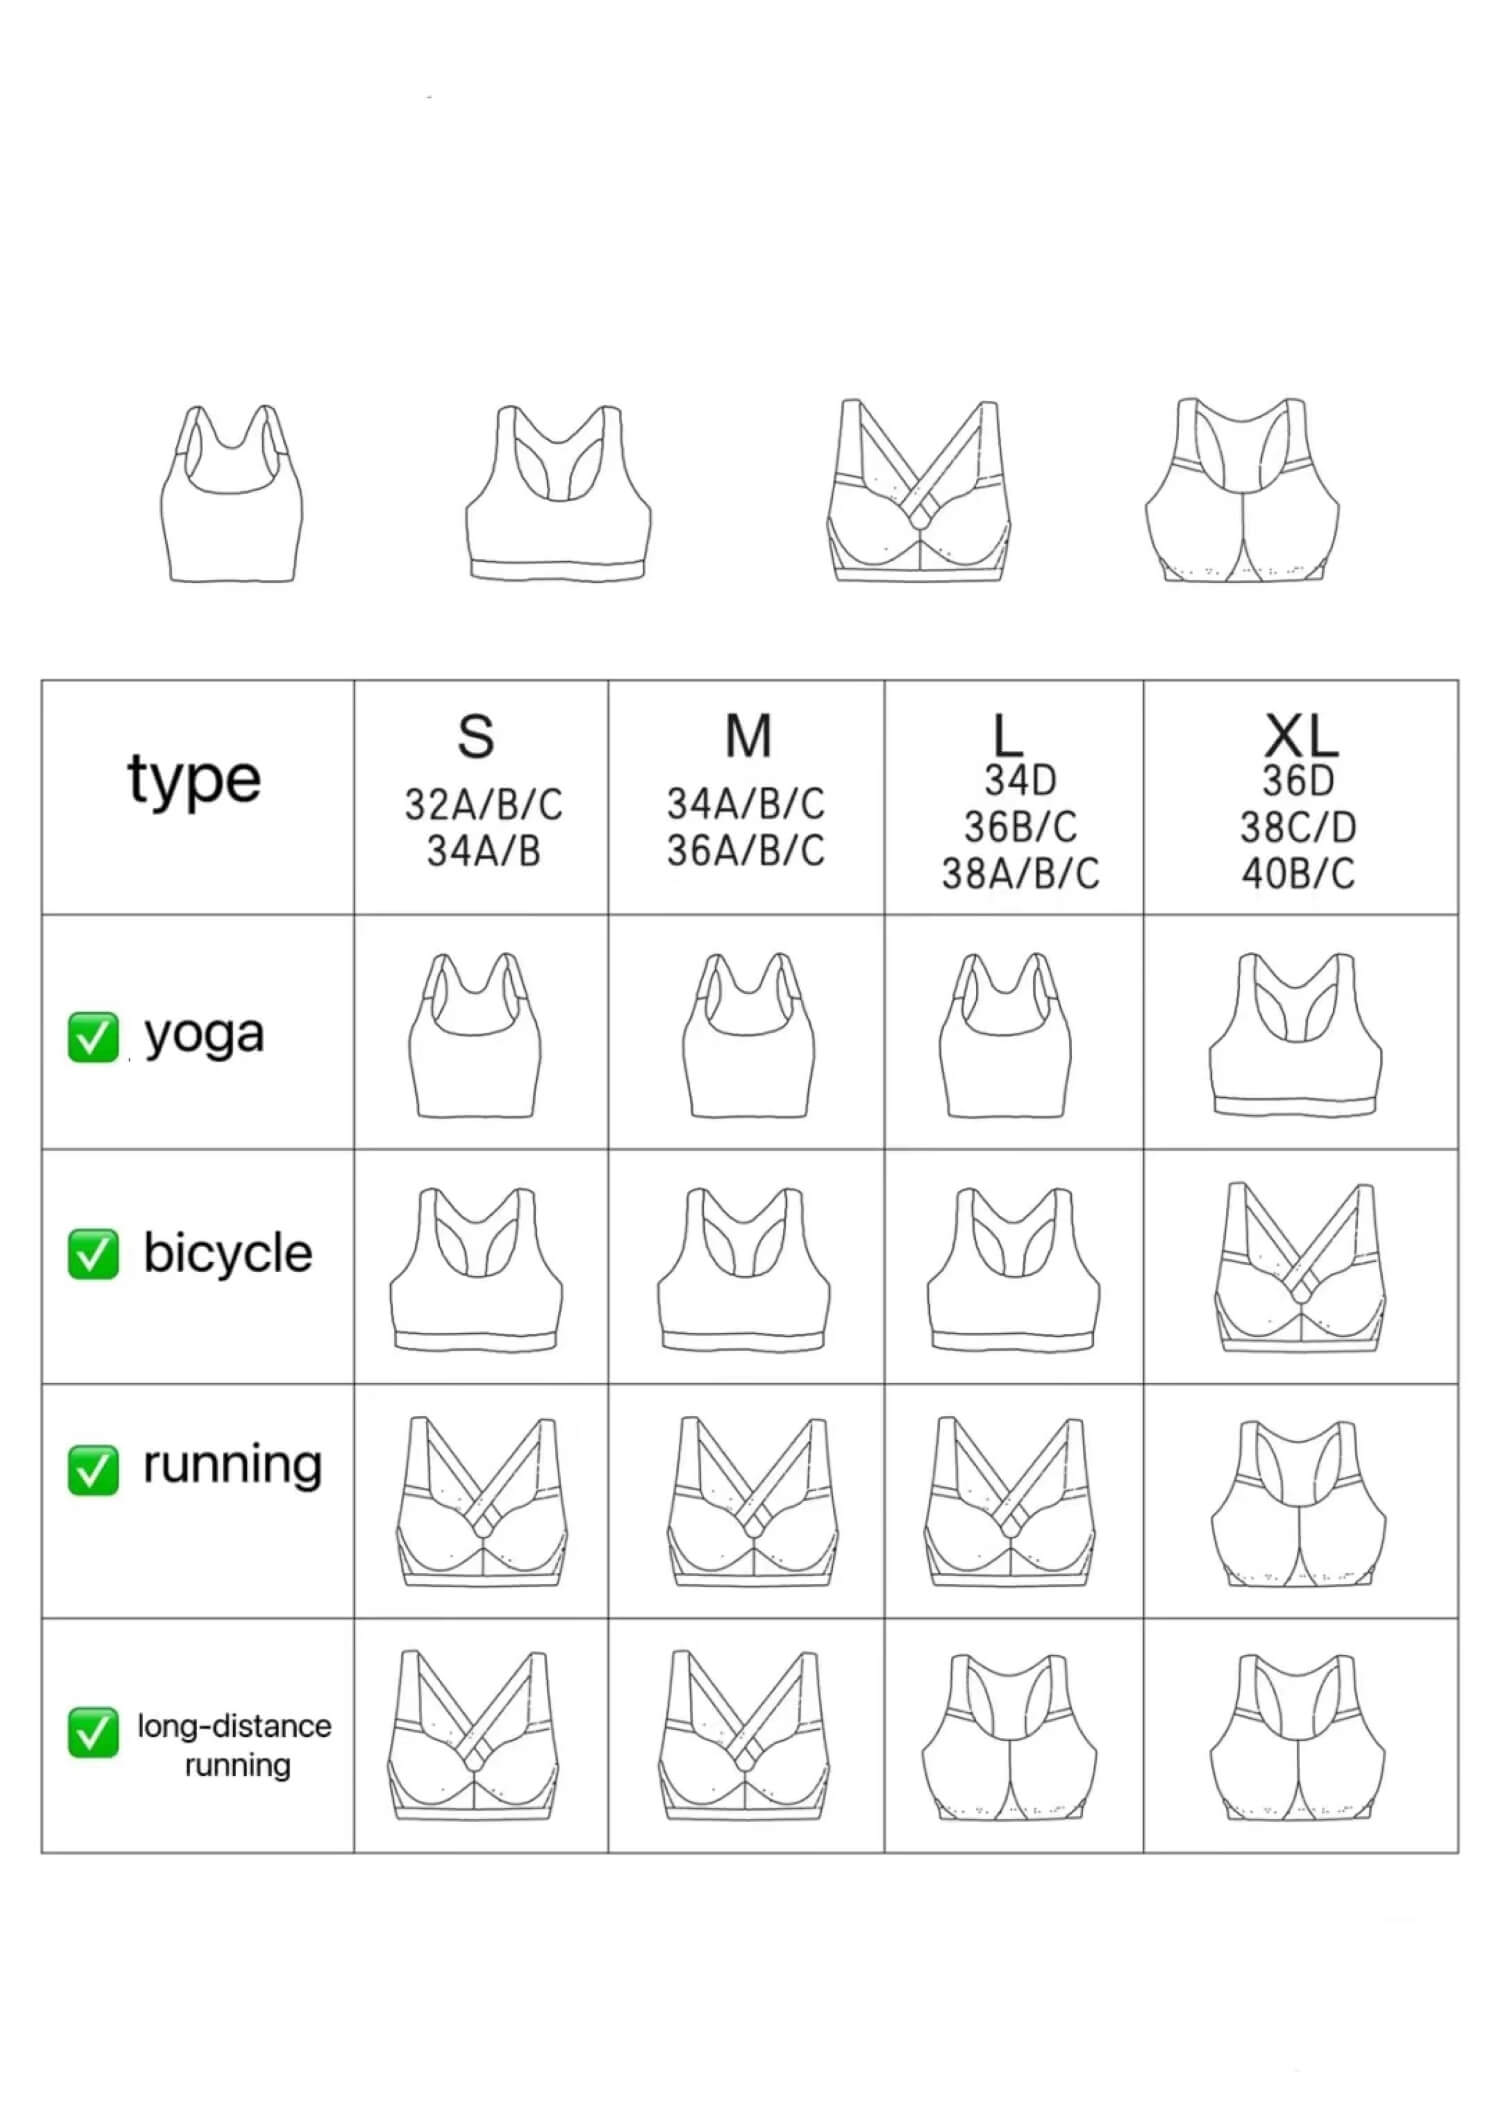 How to choose sports bra——type